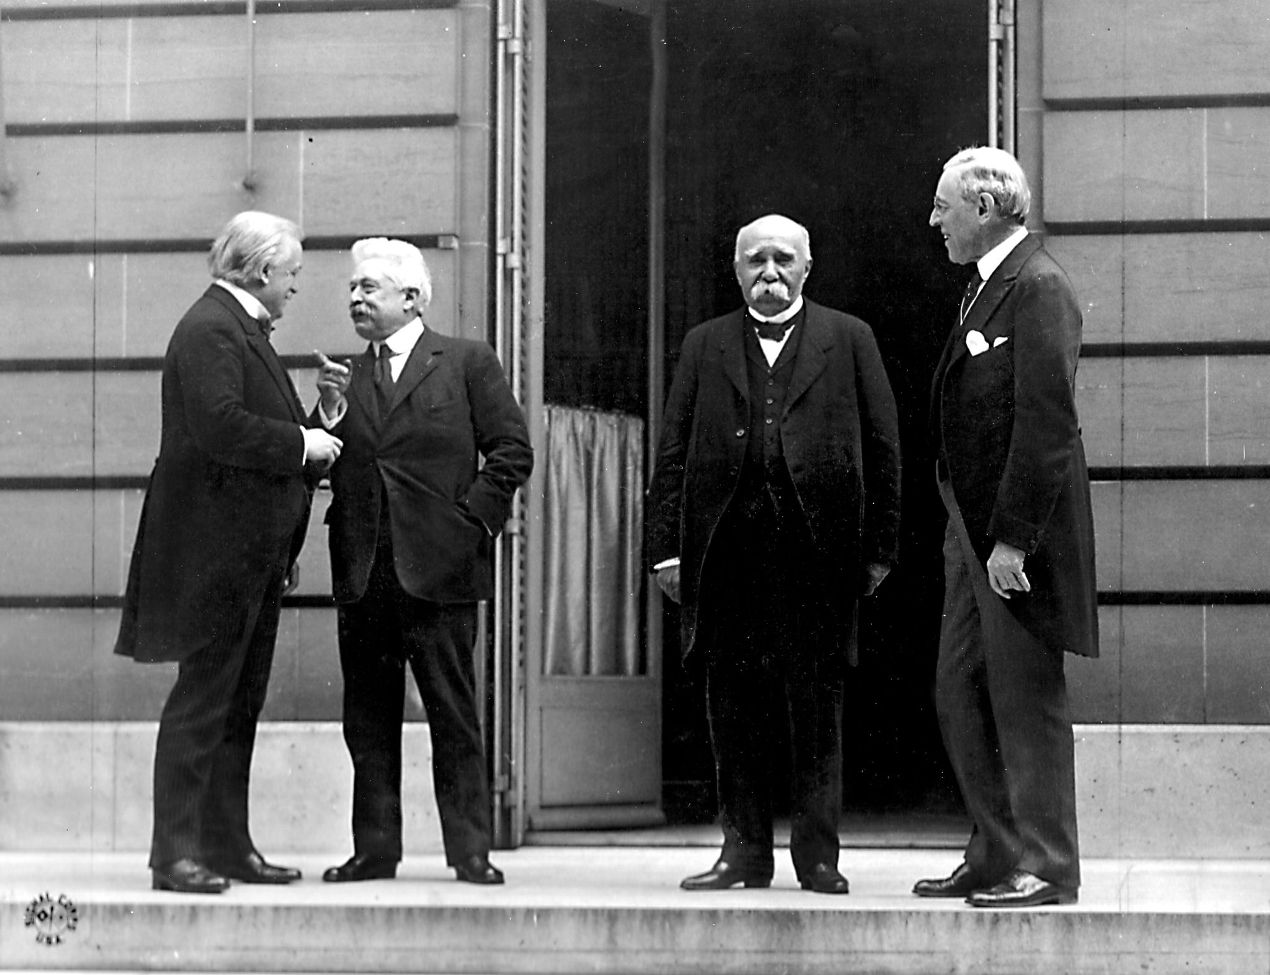 January 18, 1919: The Peace Conference Convenes at Paris